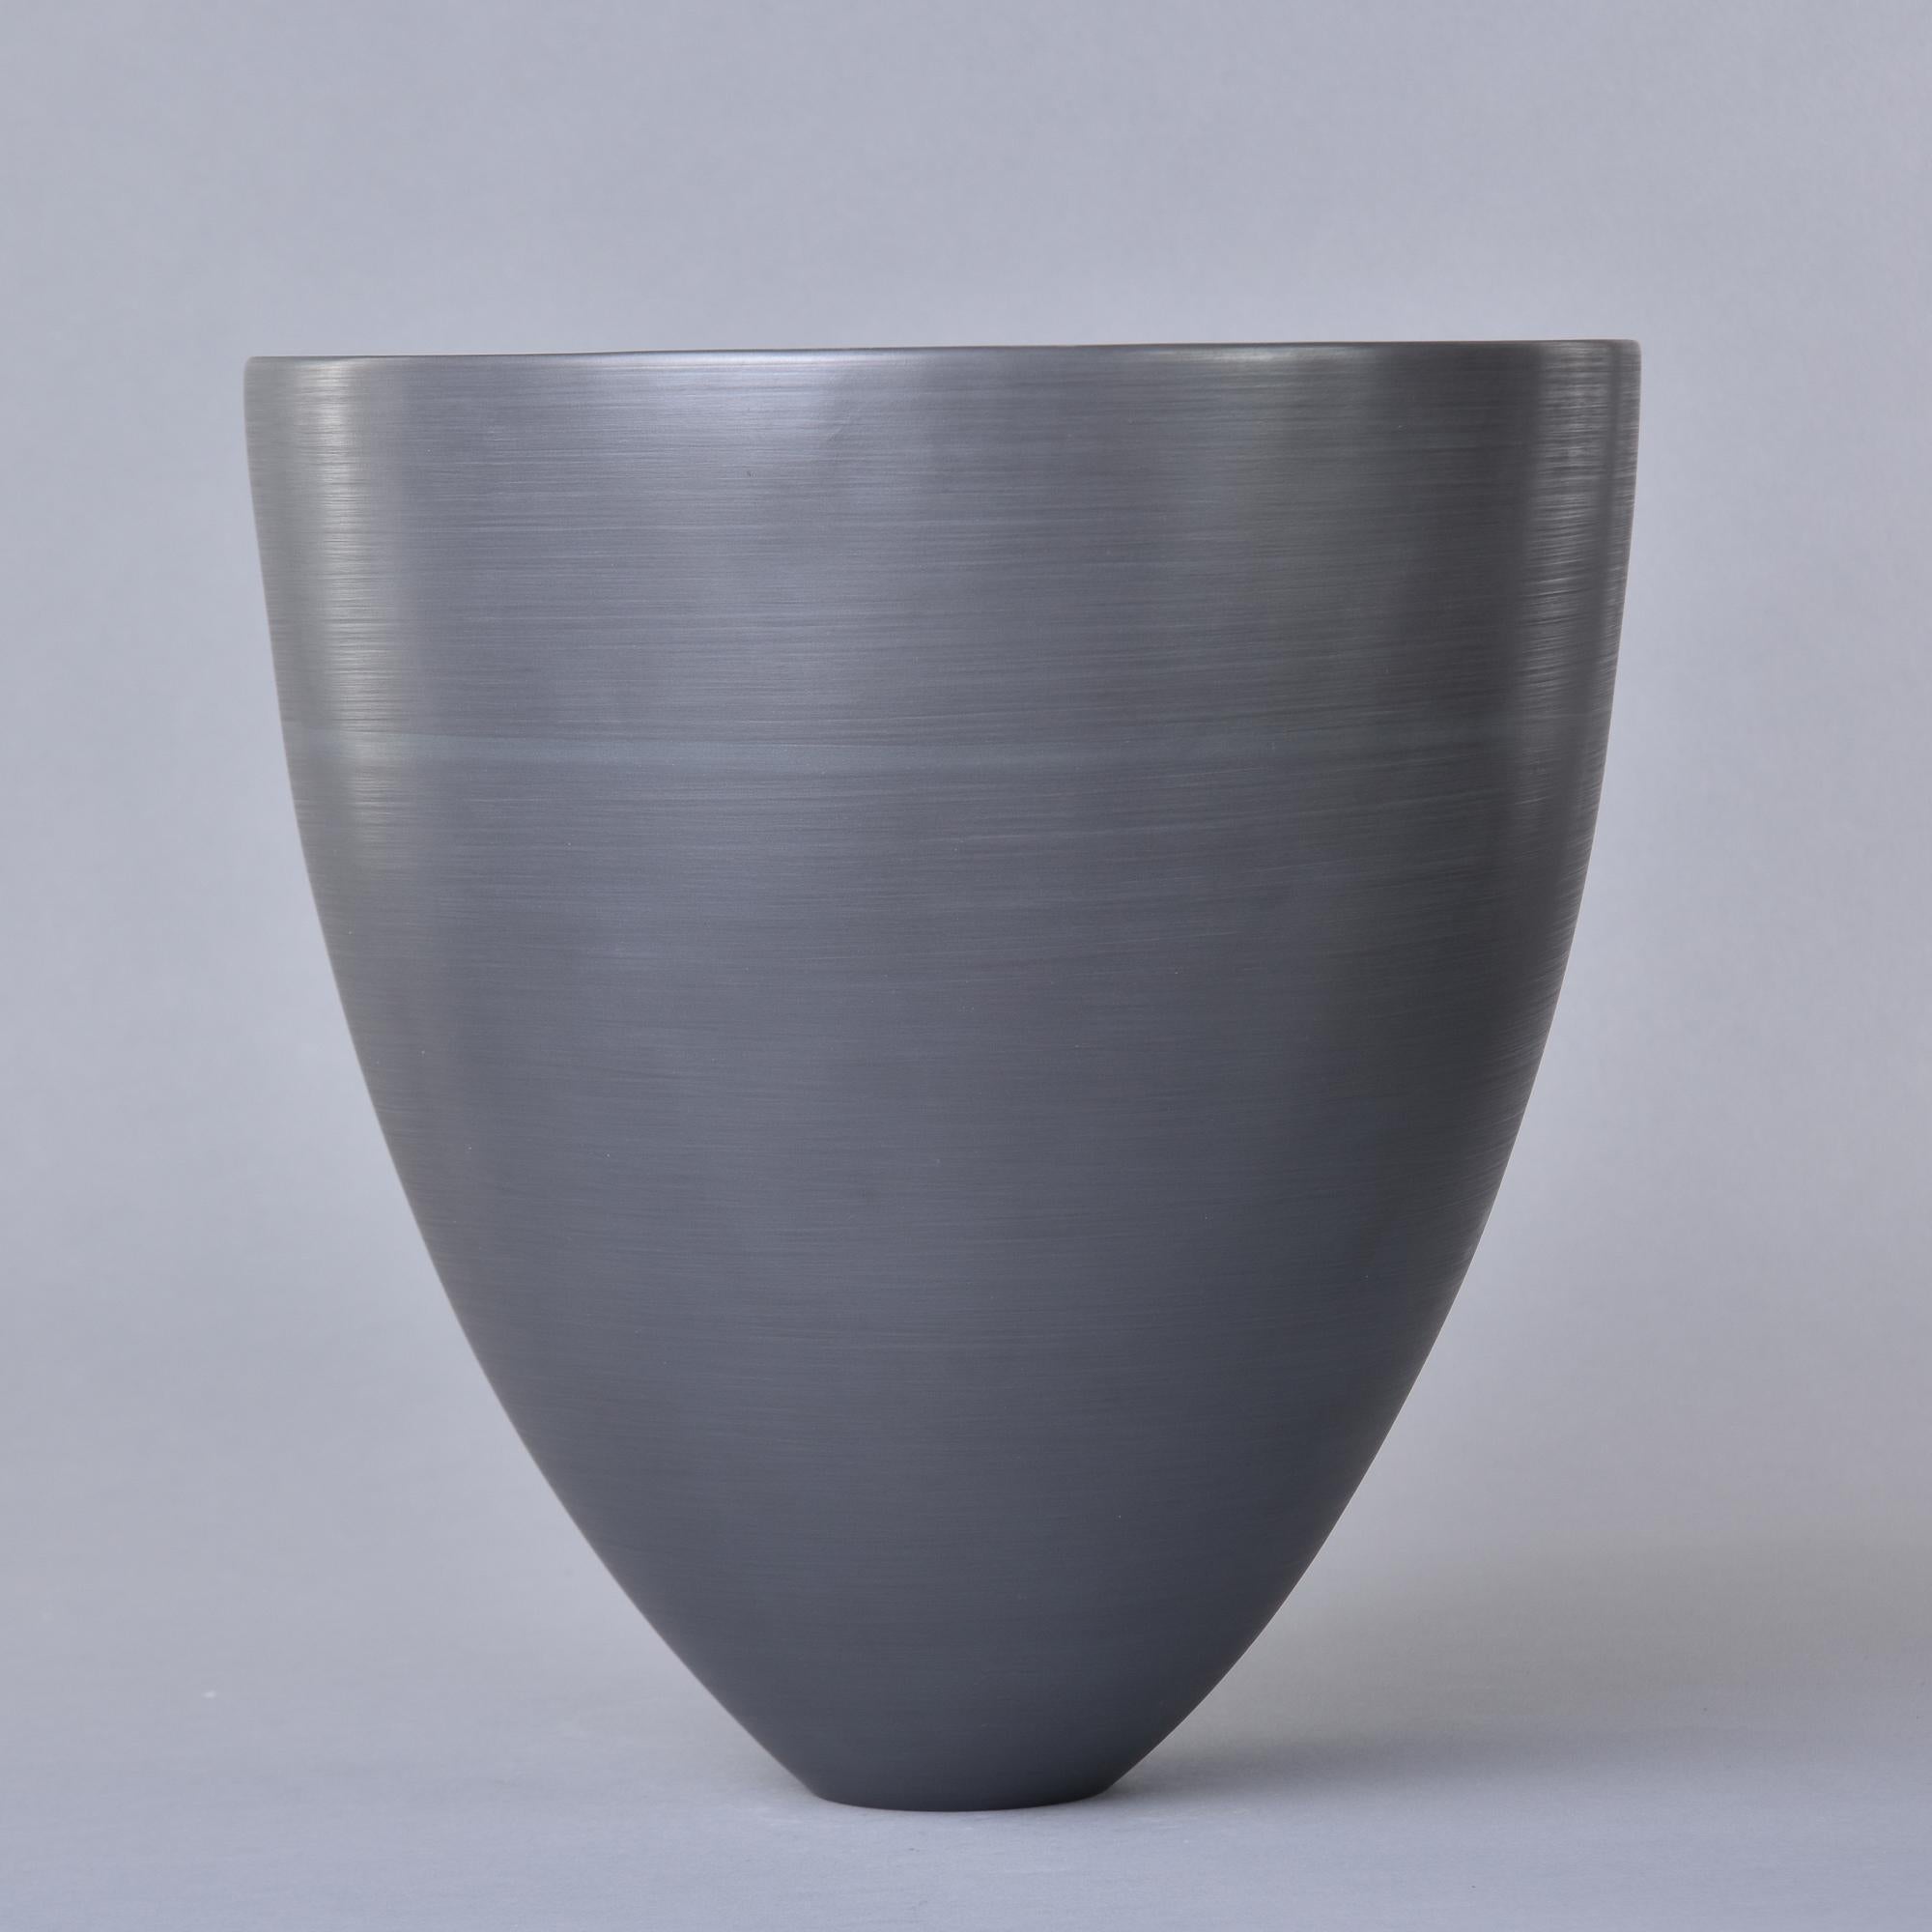 Contemporary New Rina Menardi Large Cup Form Bowl or Vase in Graphite For Sale